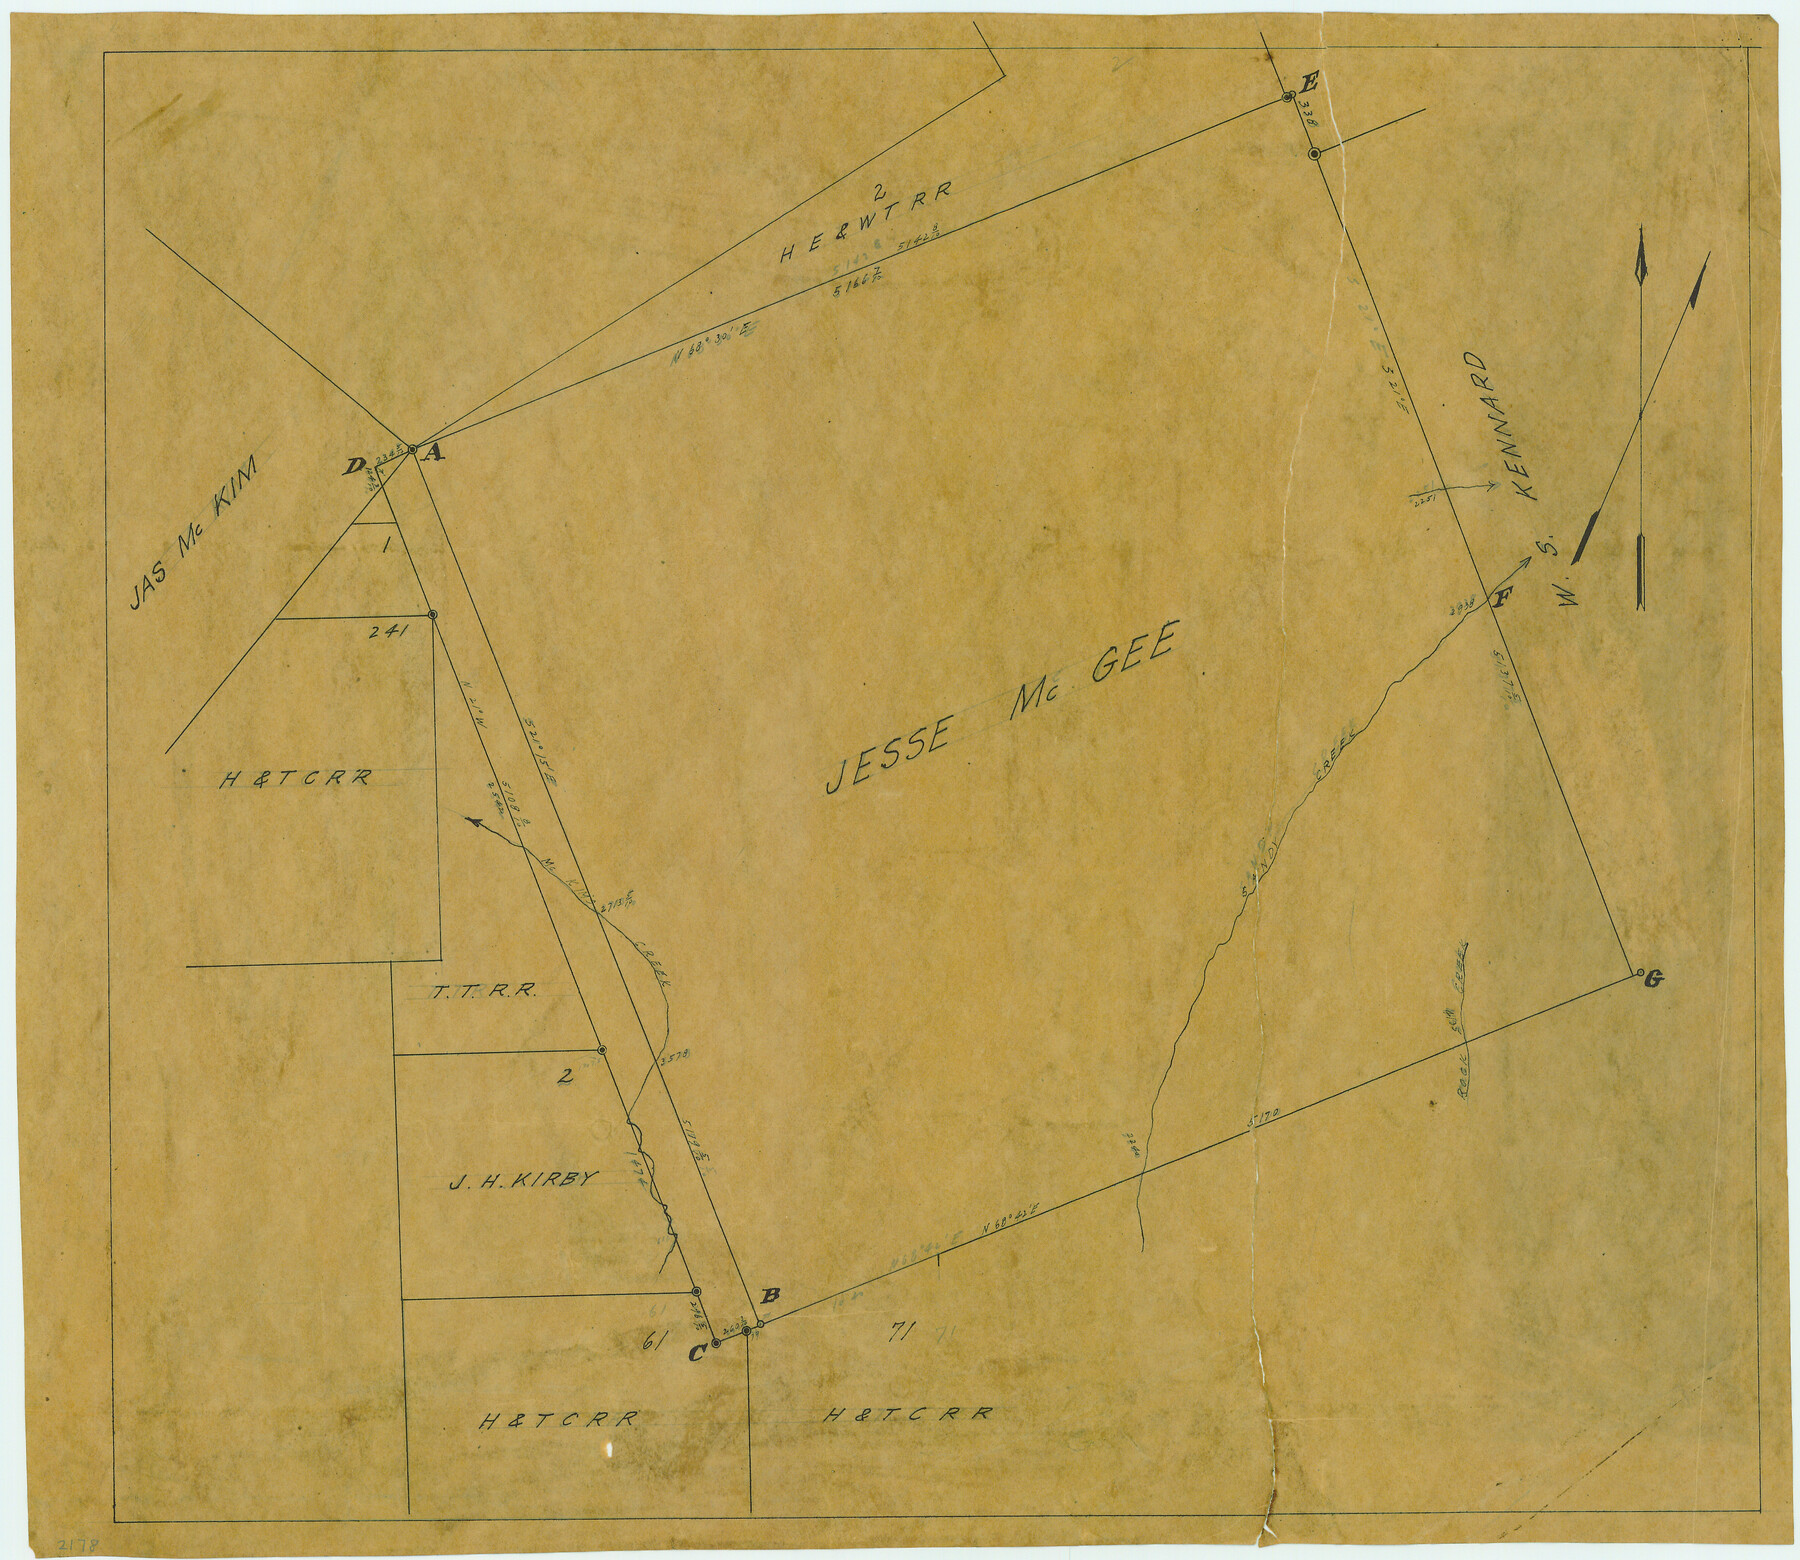 78480, [Surveying Sketch of Jesse McGee in Sabine and Newton Counties], Maddox Collection